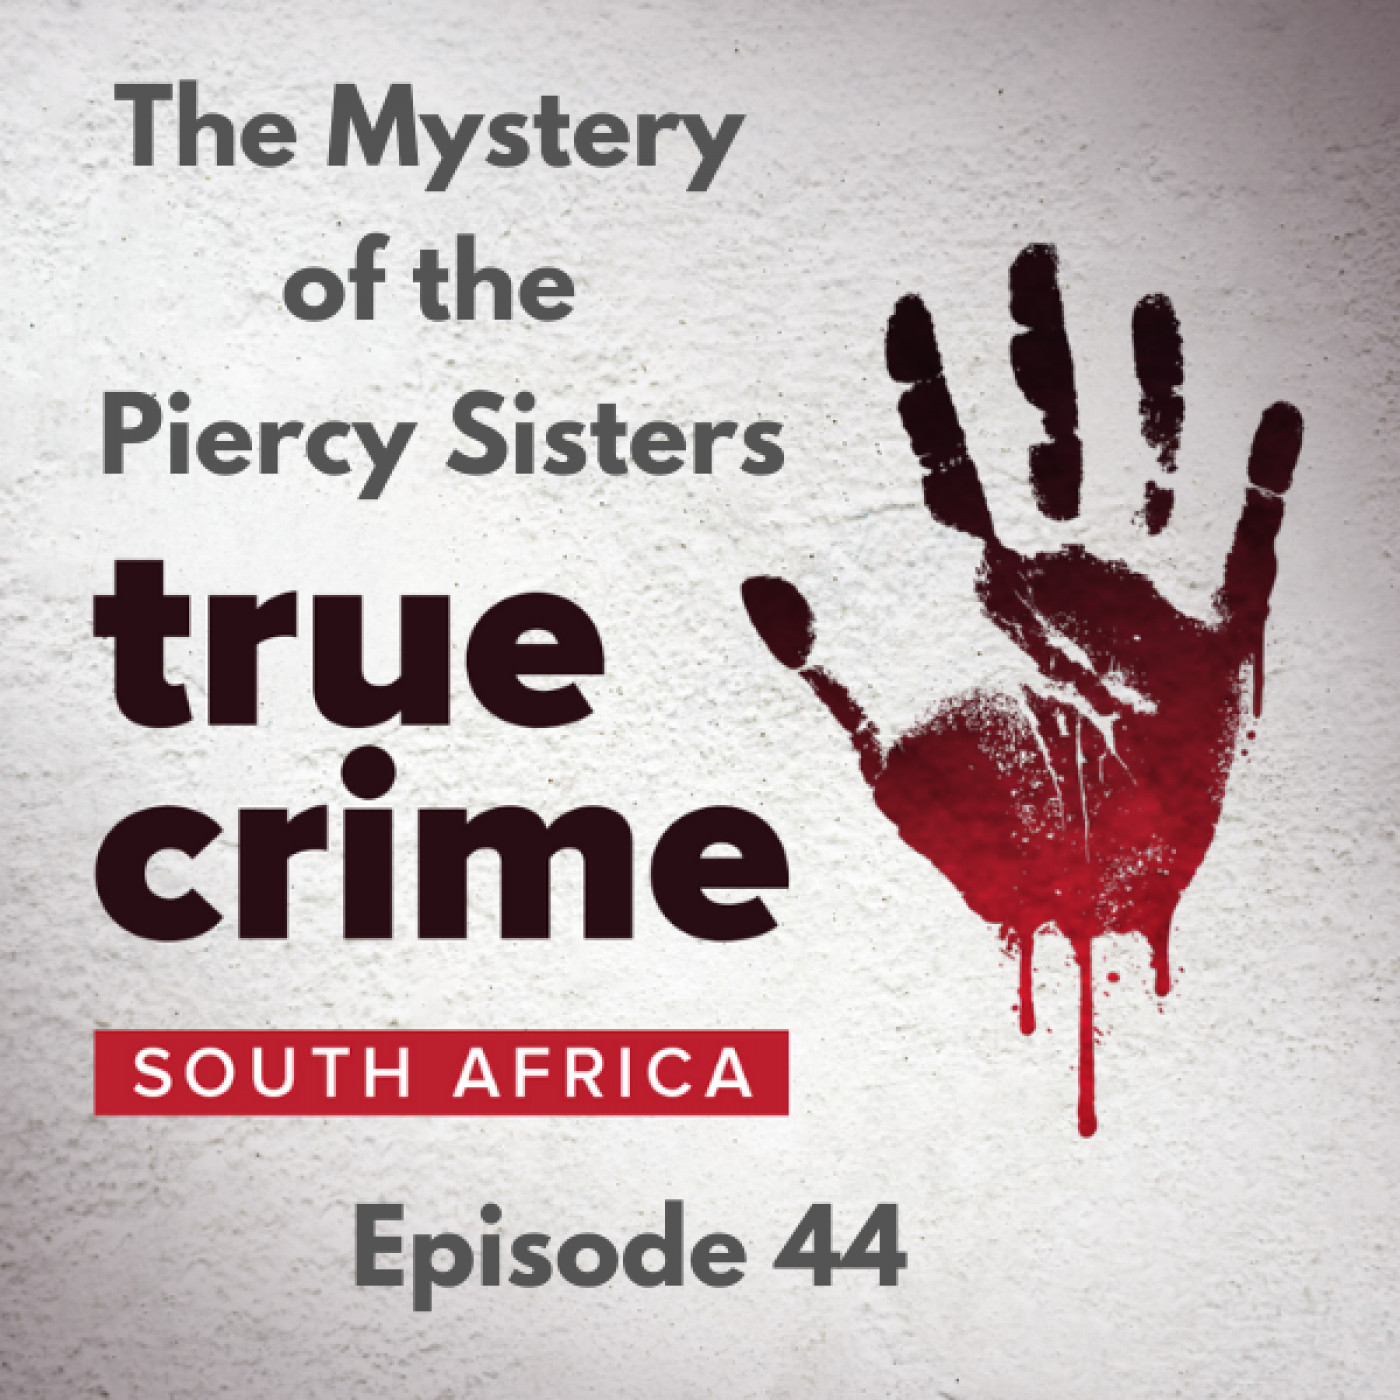 Episode 44 - The Mystery of the Piercy Sisters